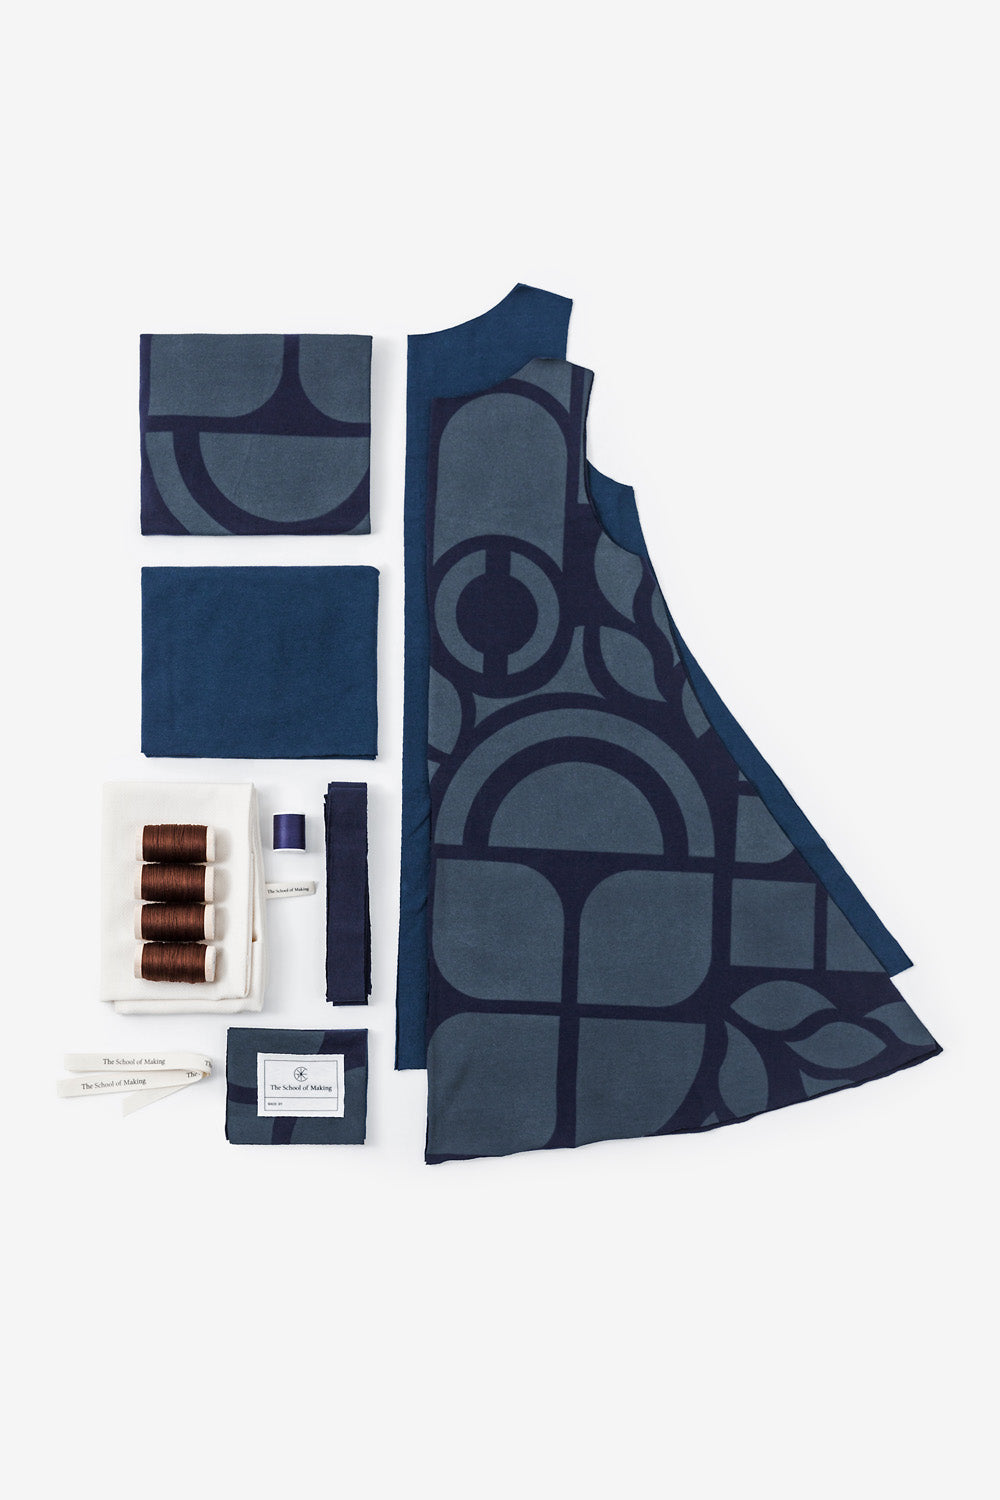 The School of Making A-Line Tunic Kit in Navy and Peacock with Abstract Stencil. Image shows kit contents, including pre-cut fabric, thread, and embroidery floss.